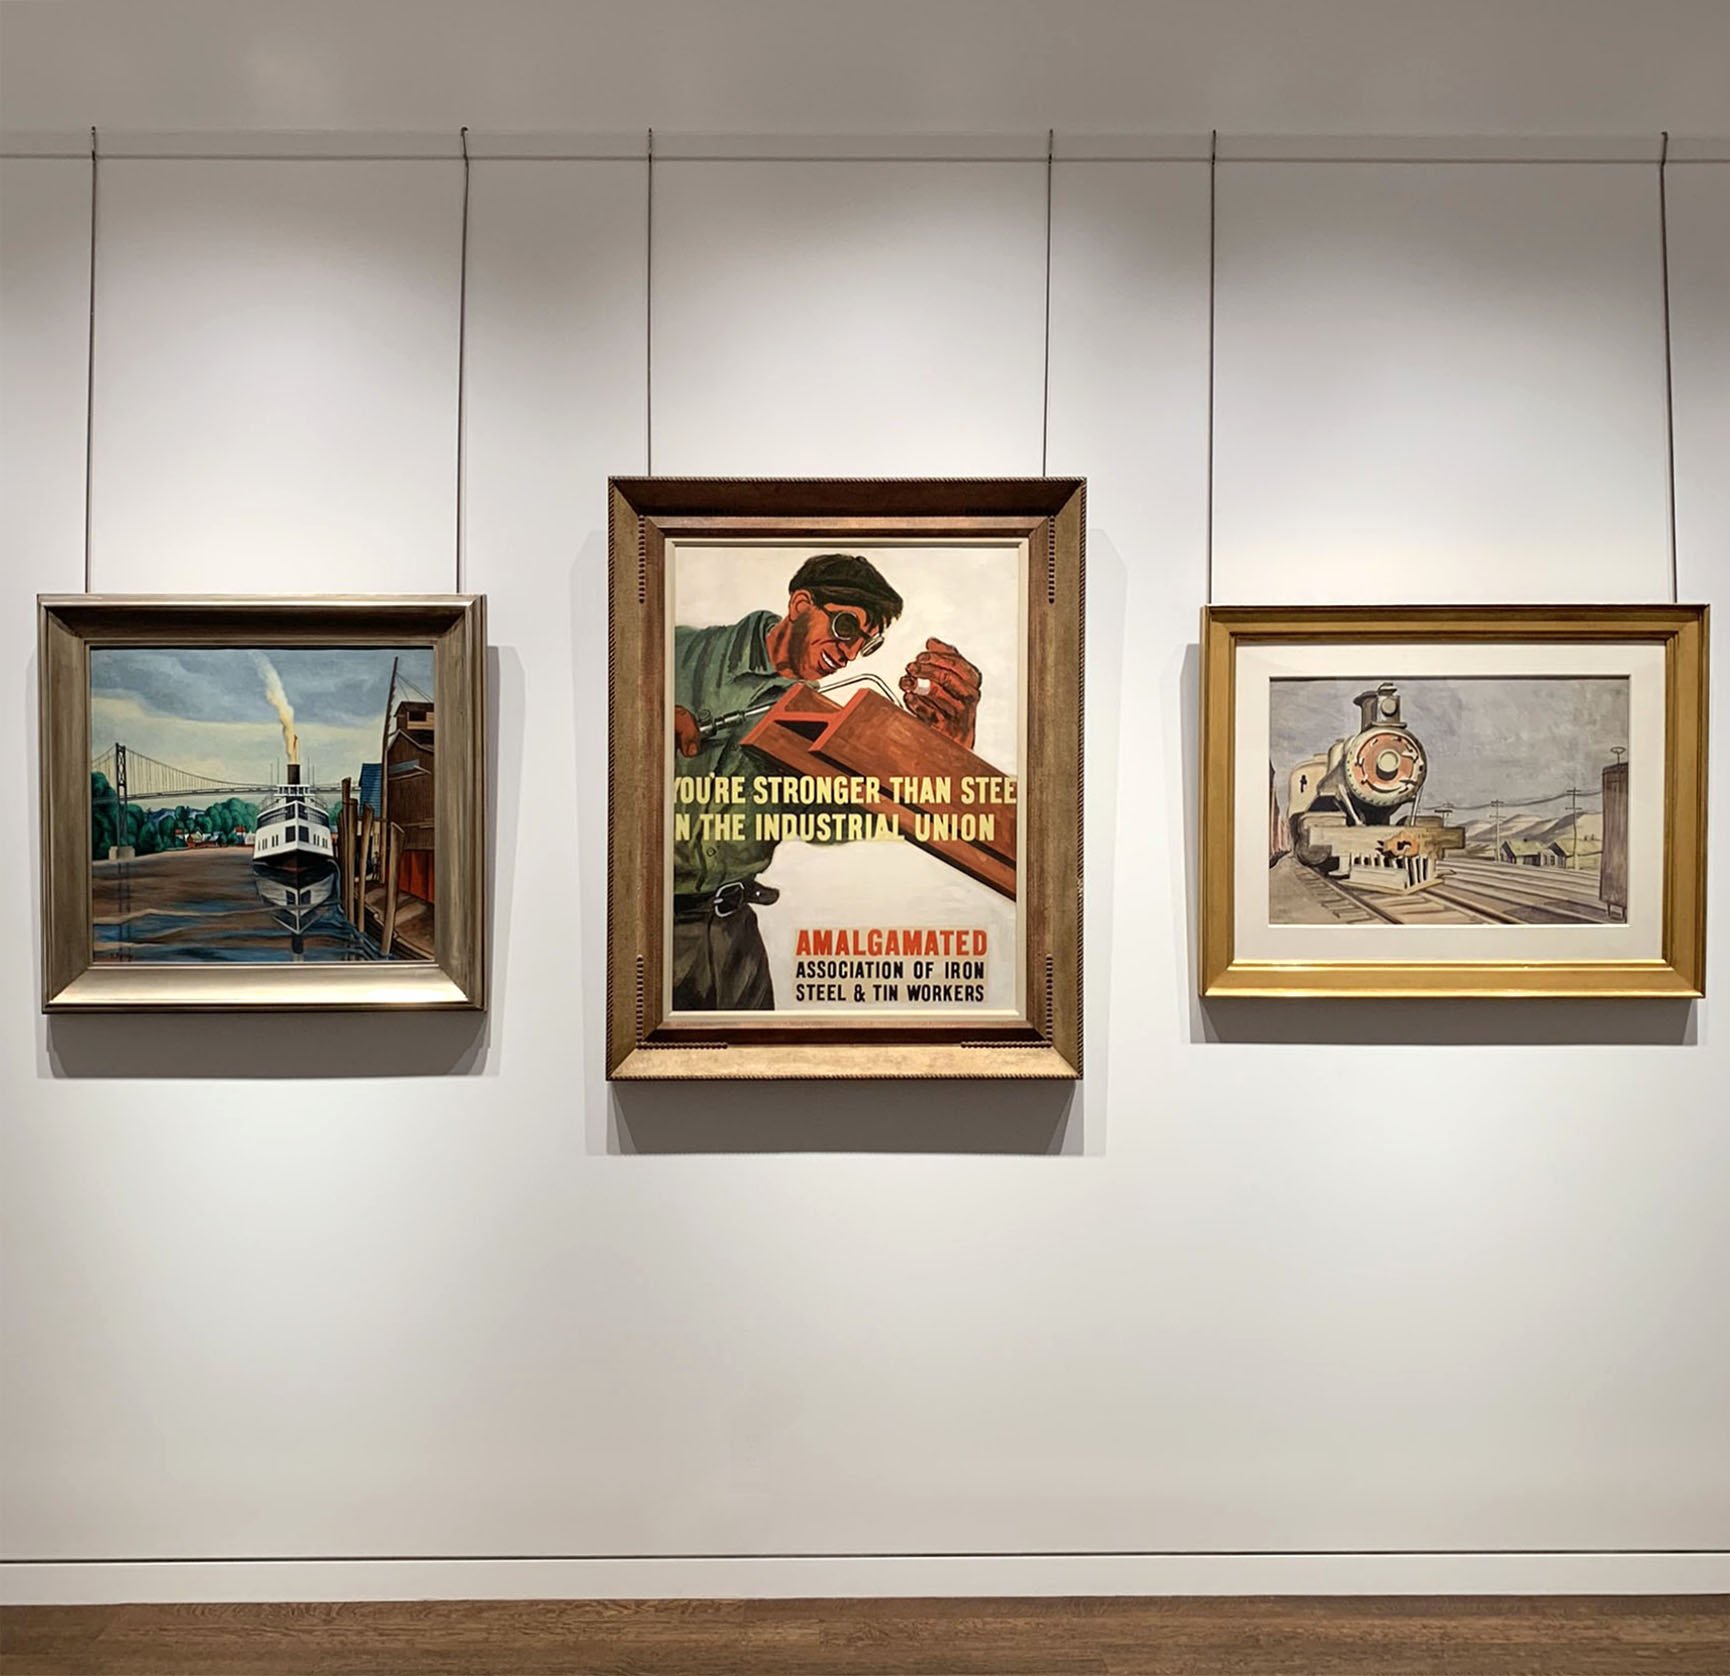  AMERICAN ART FOR THE PUBLIC: MURAL STUDIES AND PAINTINGS, 1930-1945 October 19, 2020 - February 15, 2021 